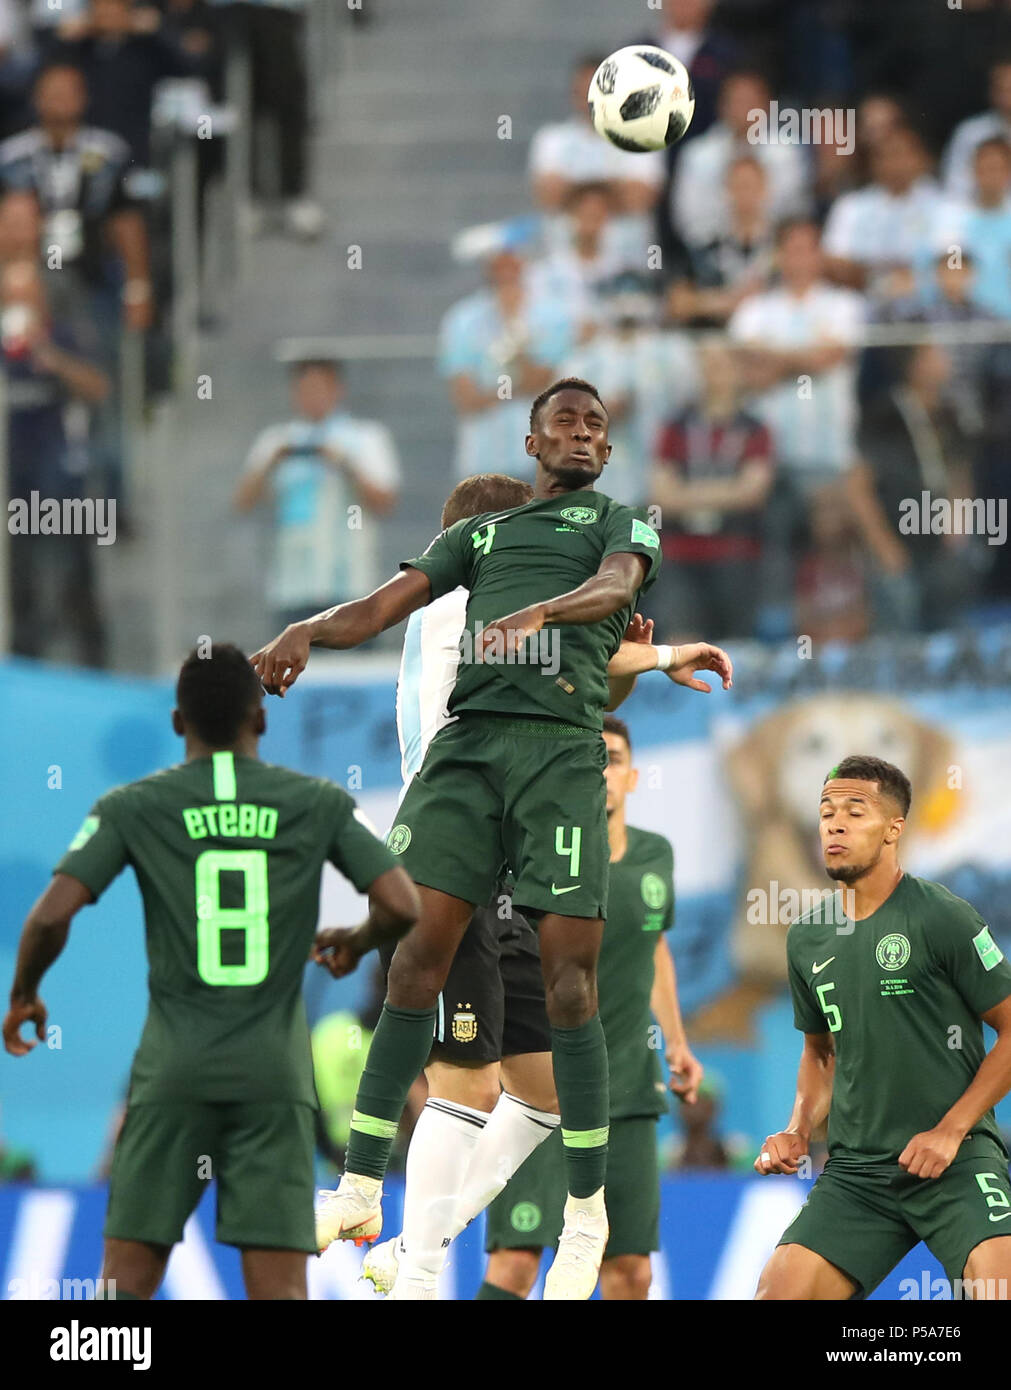 Saint Petersburg, Russia. 26th June, 2018. Wilfred Ndidi (top) of Nigeria competes for a header during the 2018 FIFA World Cup Group D match between Nigeria and Argentina in Saint Petersburg, Russia, June 26, 2018. Credit: Wu Zhuang/Xinhua/Alamy Live News Stock Photo